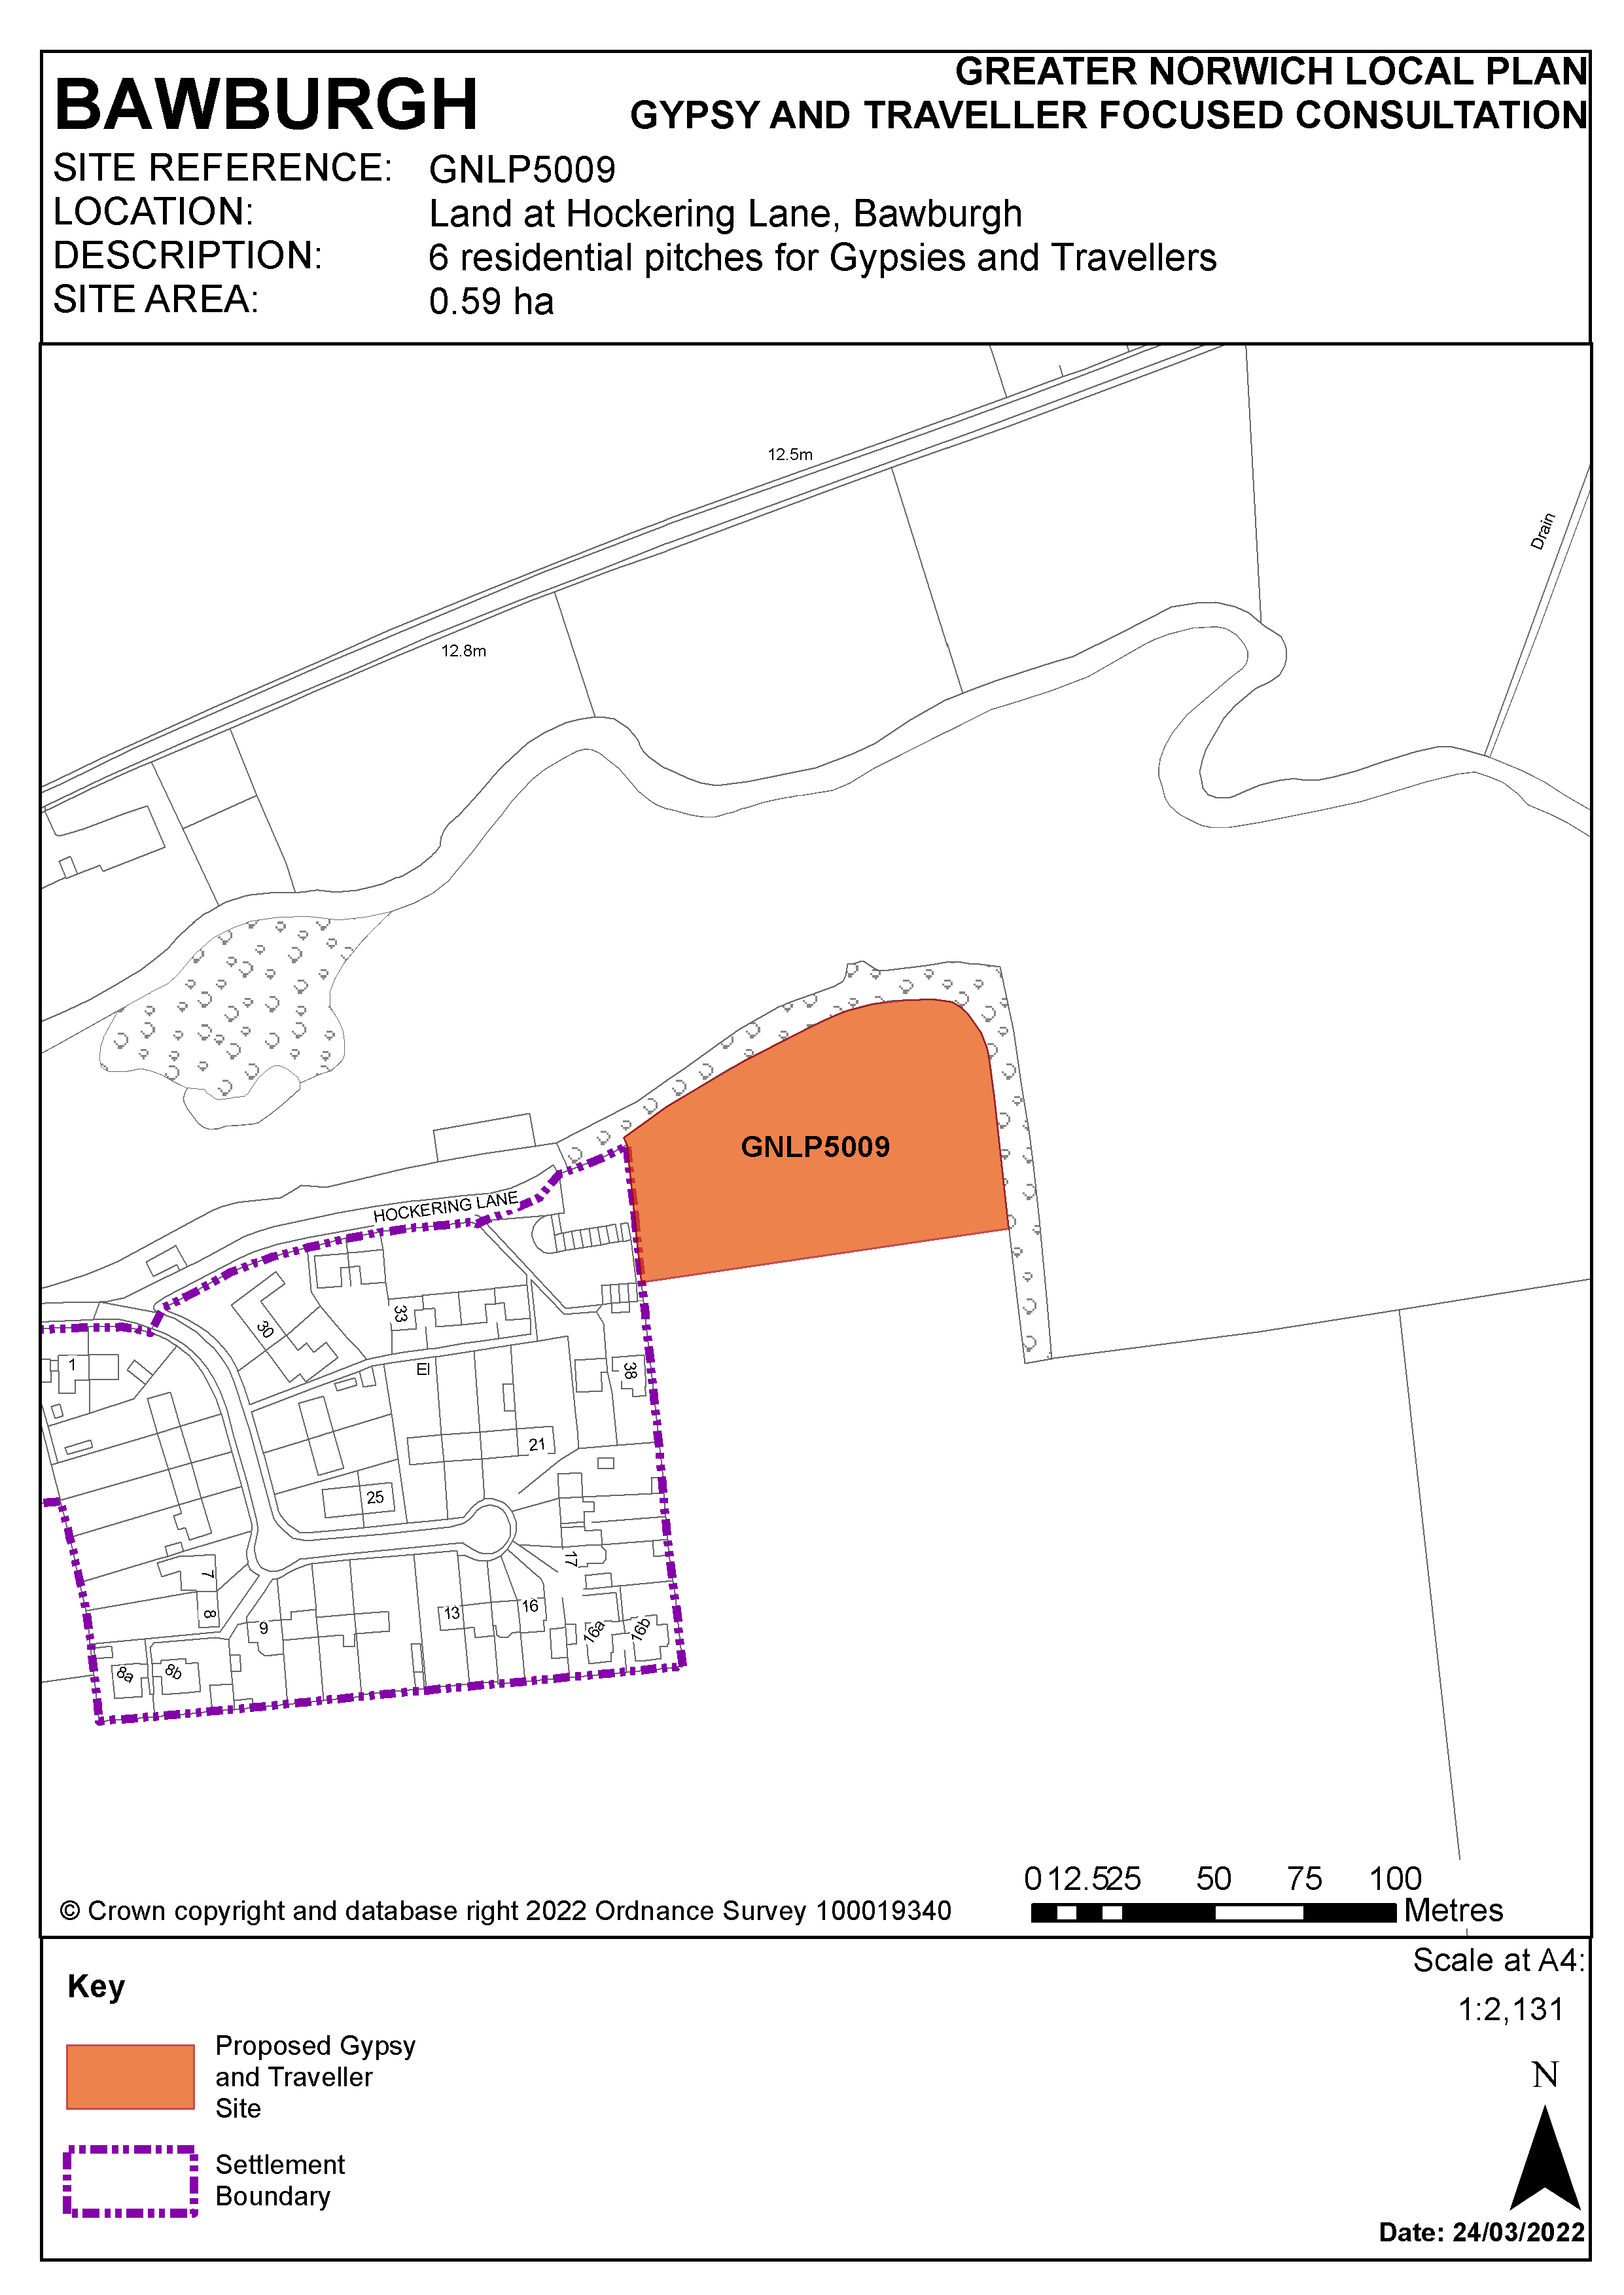 Map showing proposed Gypsy and Traveller site allocation at Hockering Lane, Bawburgh